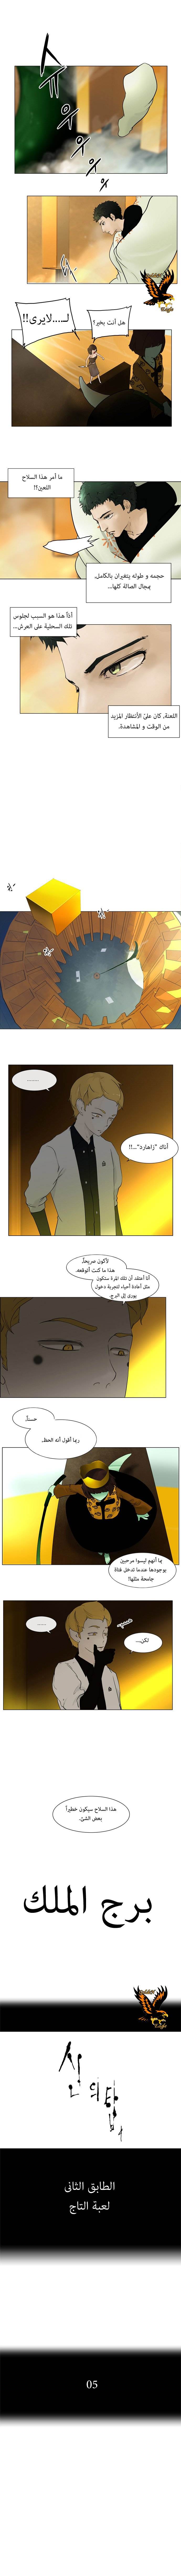 Tower of God: Chapter 18 - Page 1